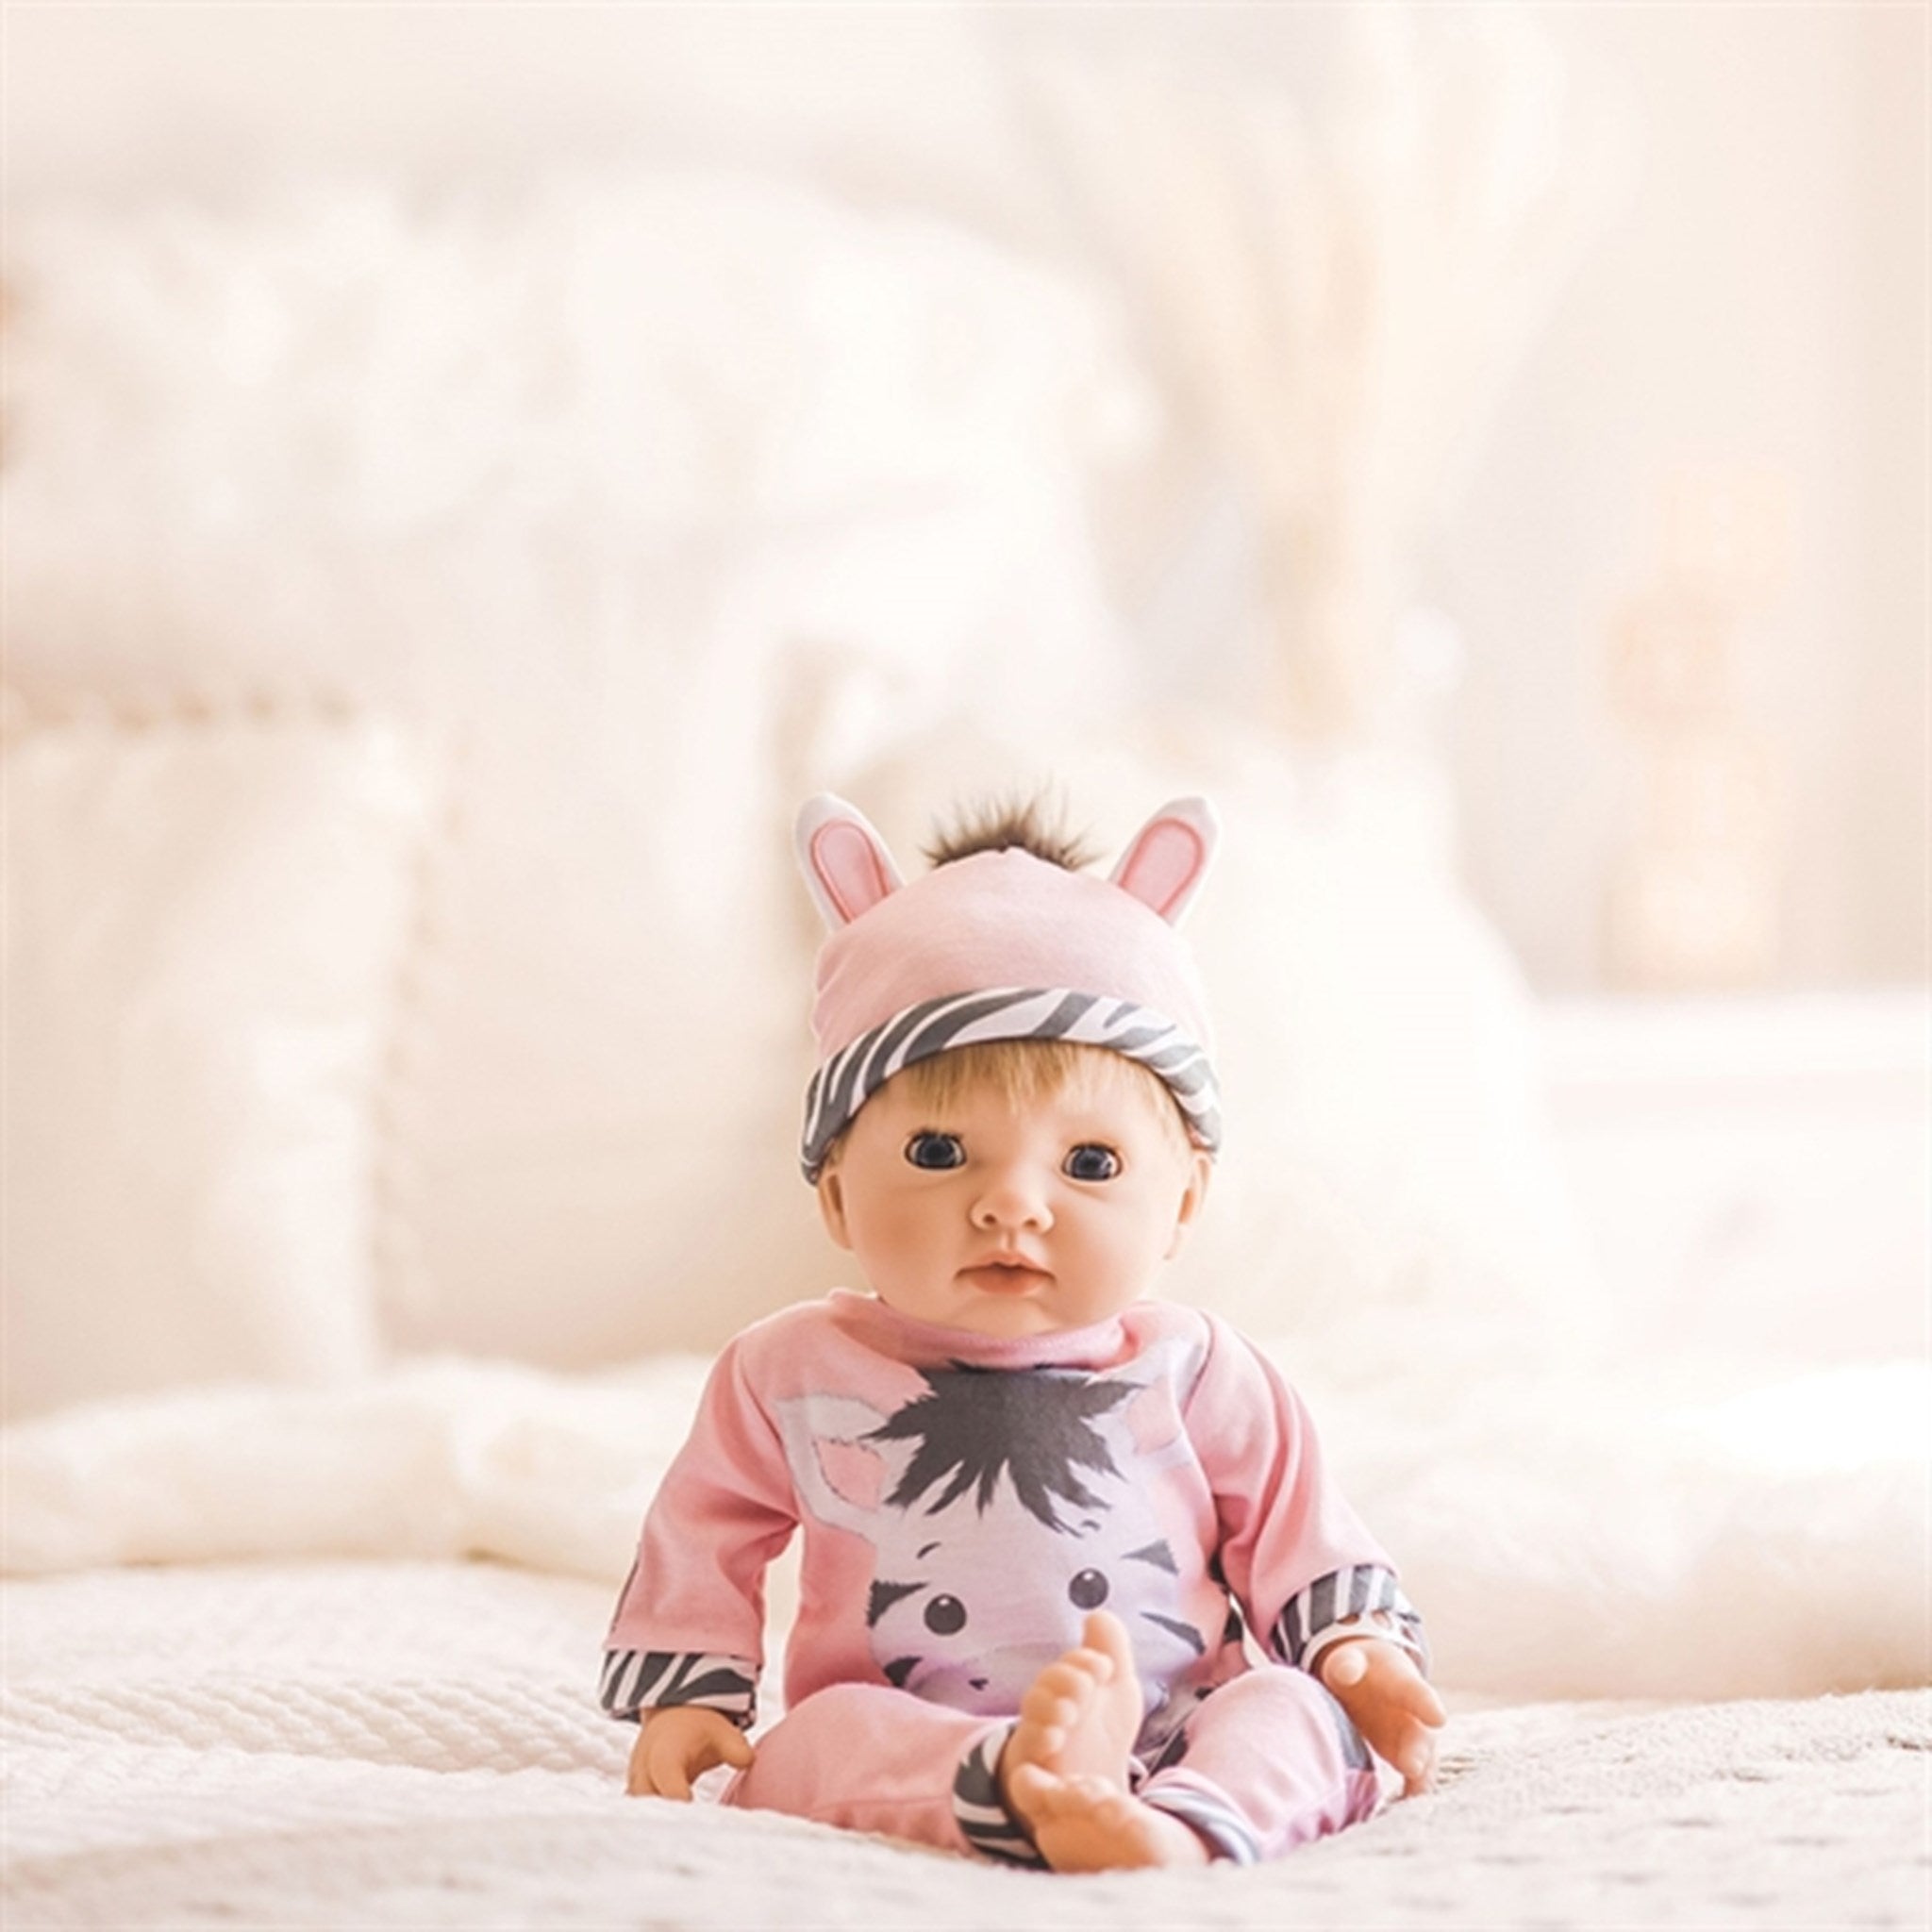 Tiny Treasure Blond Haired Doll Zebra Outfit 8